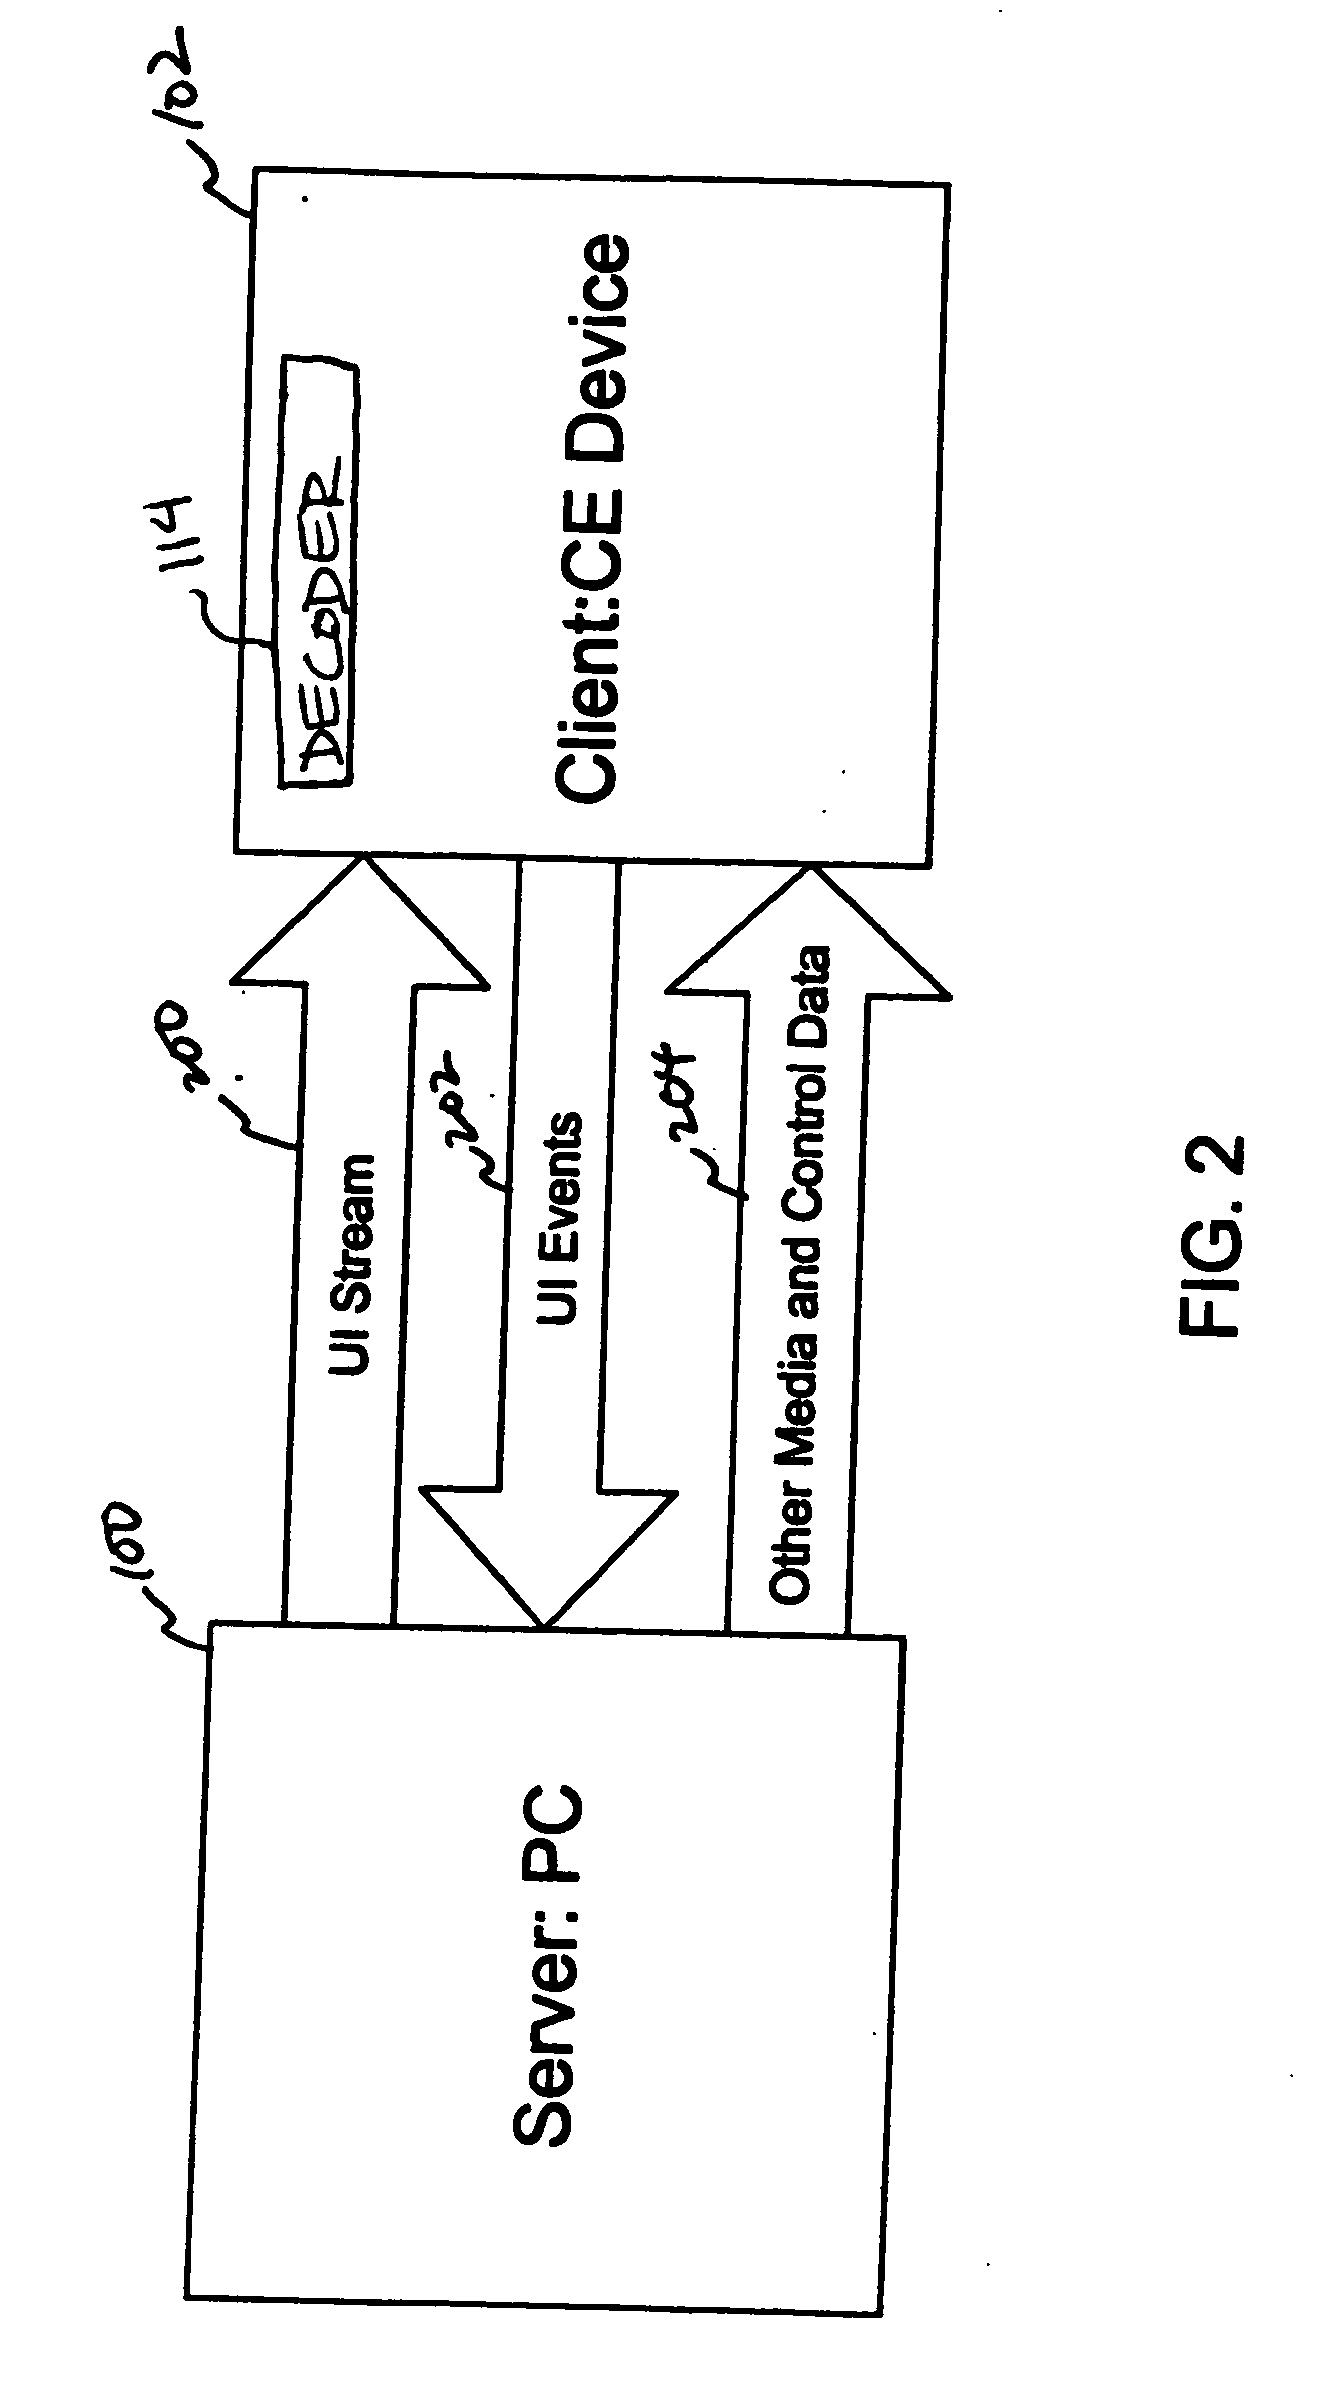 System and method for a remote user interface